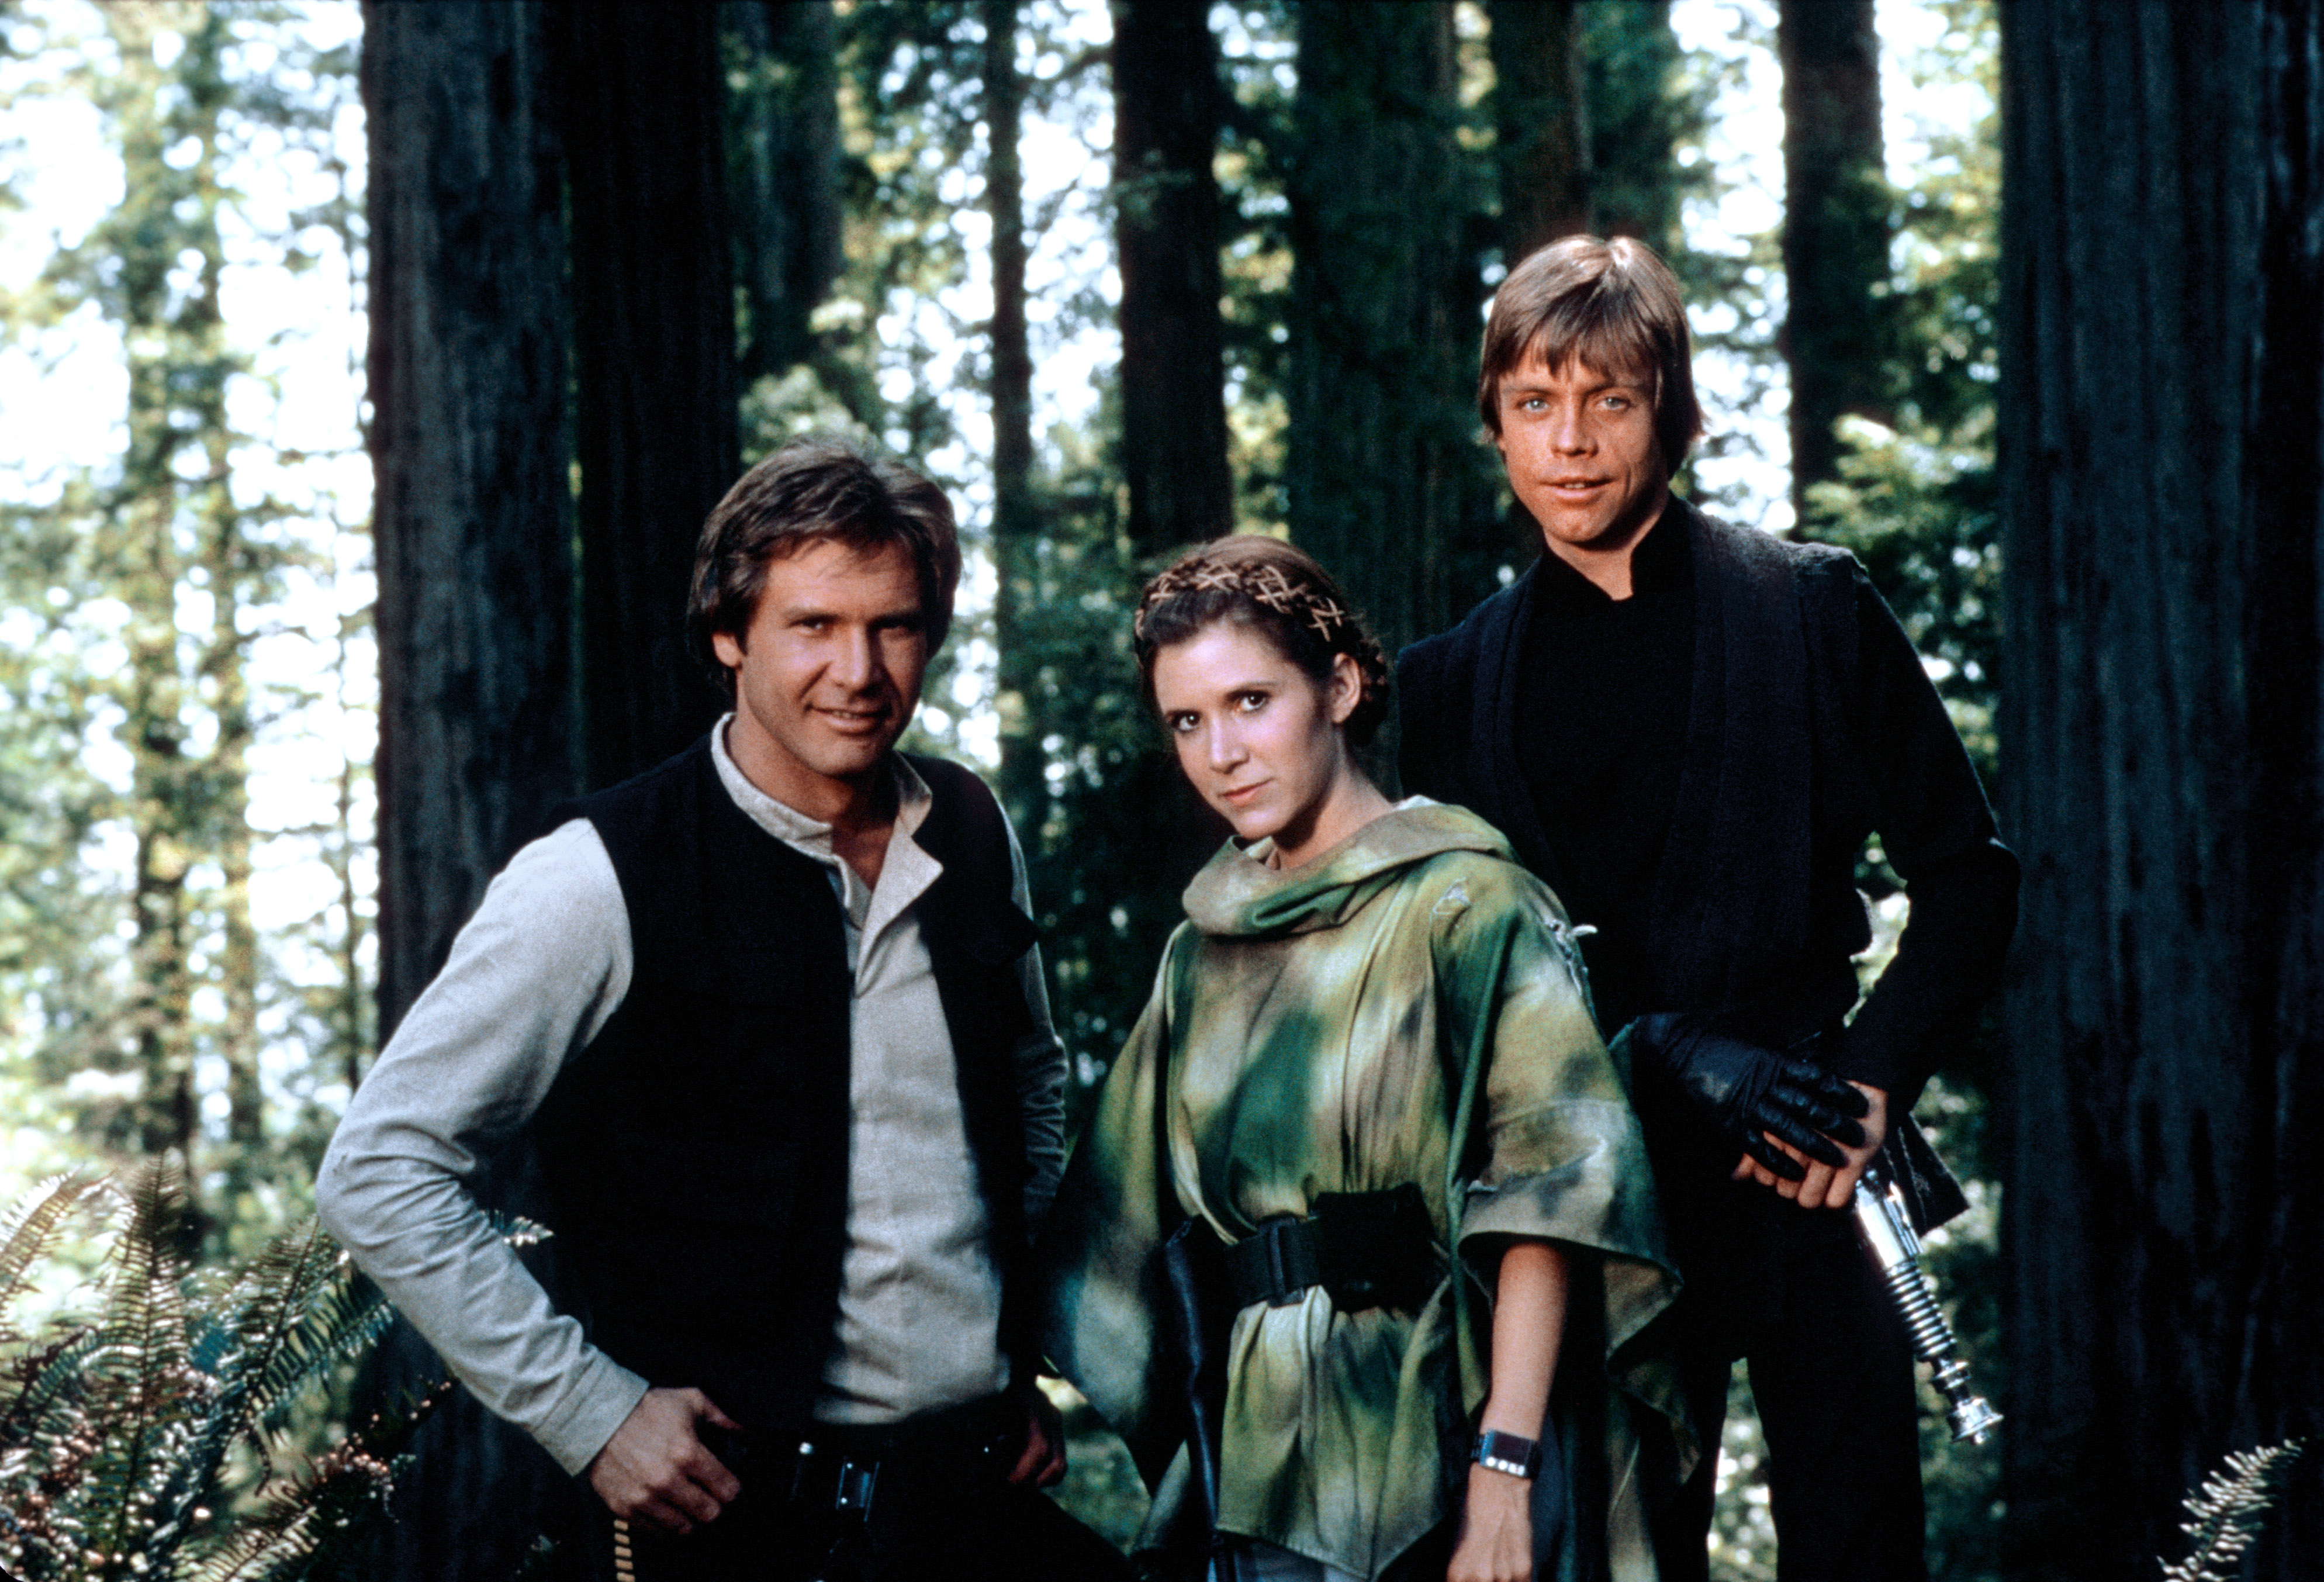 The cast of &quot;Star Wars&quot;